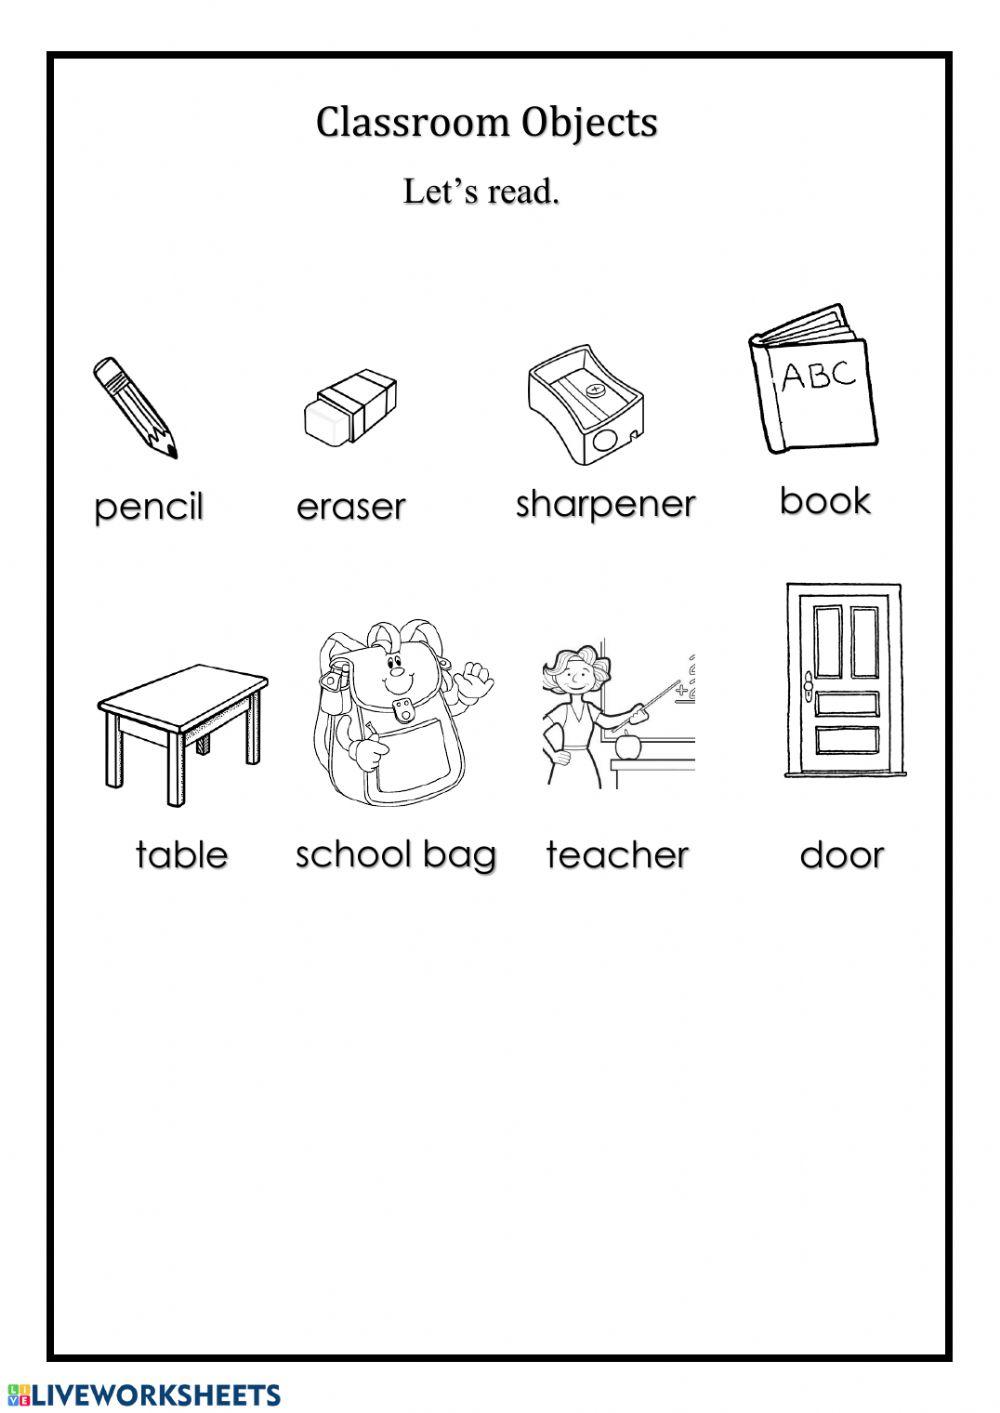 'I Can See' Classroom Objects